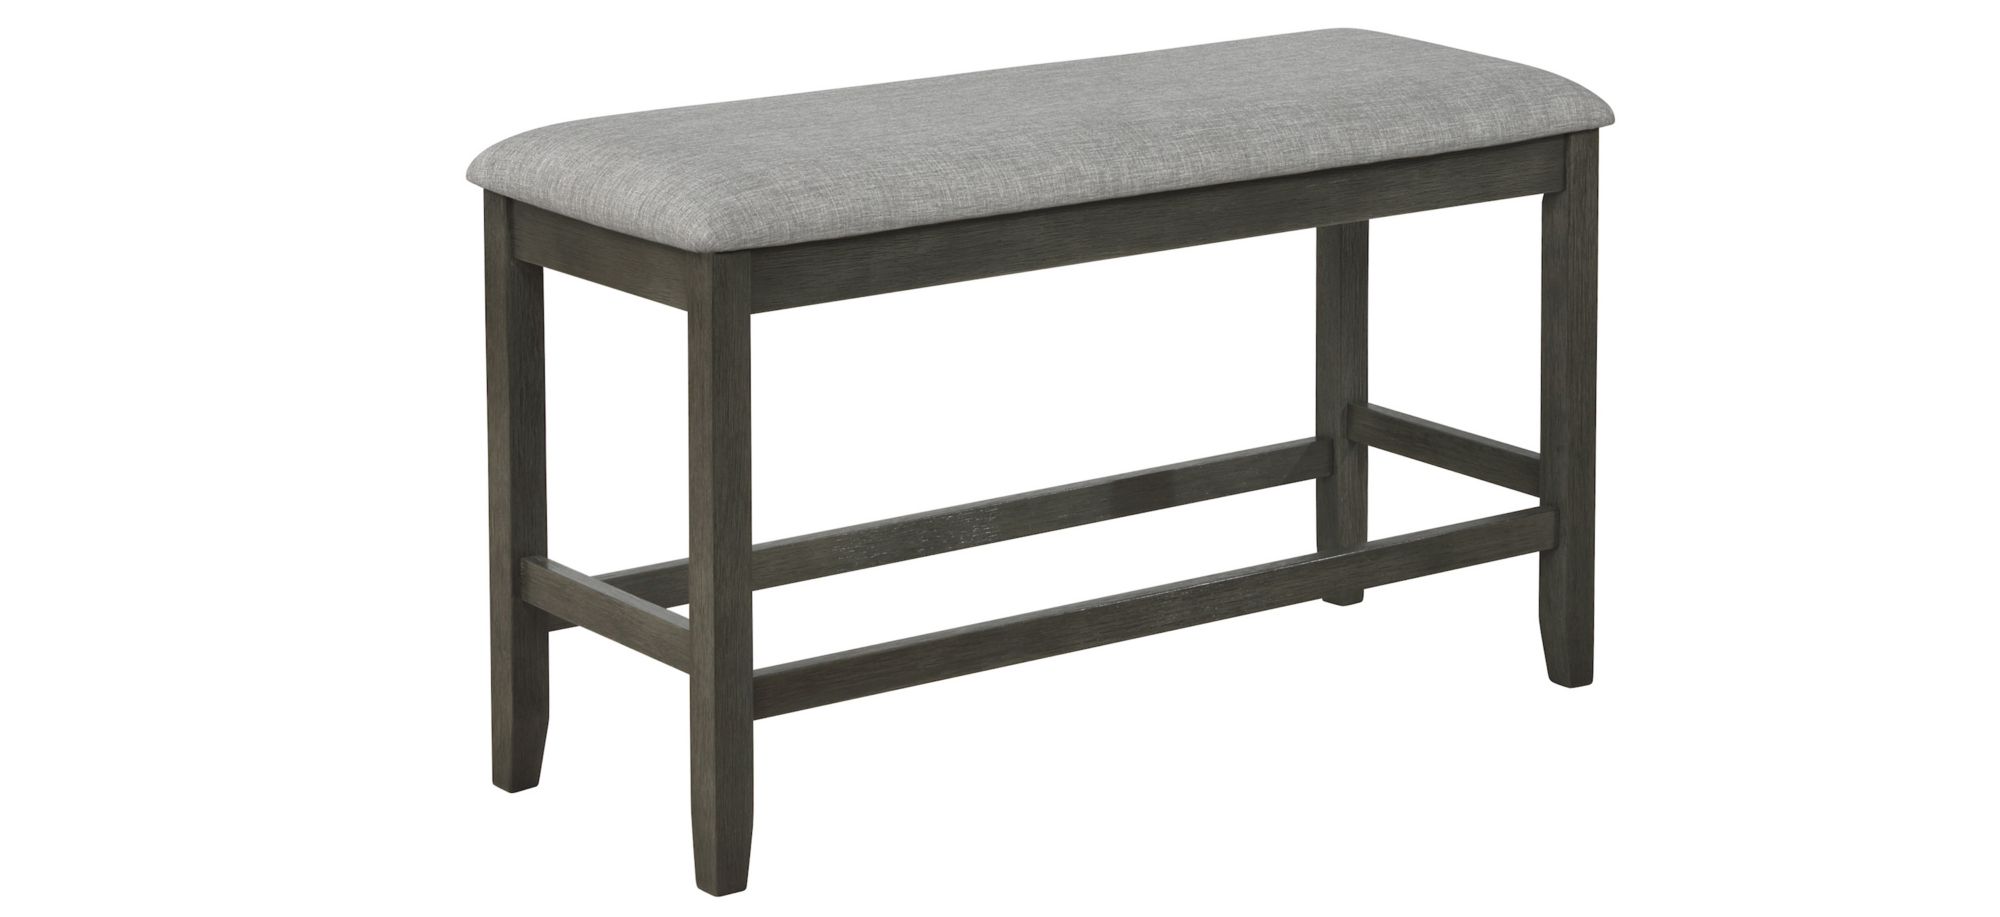 Nina Counter-Height Dining Bench in Gray by Crown Mark